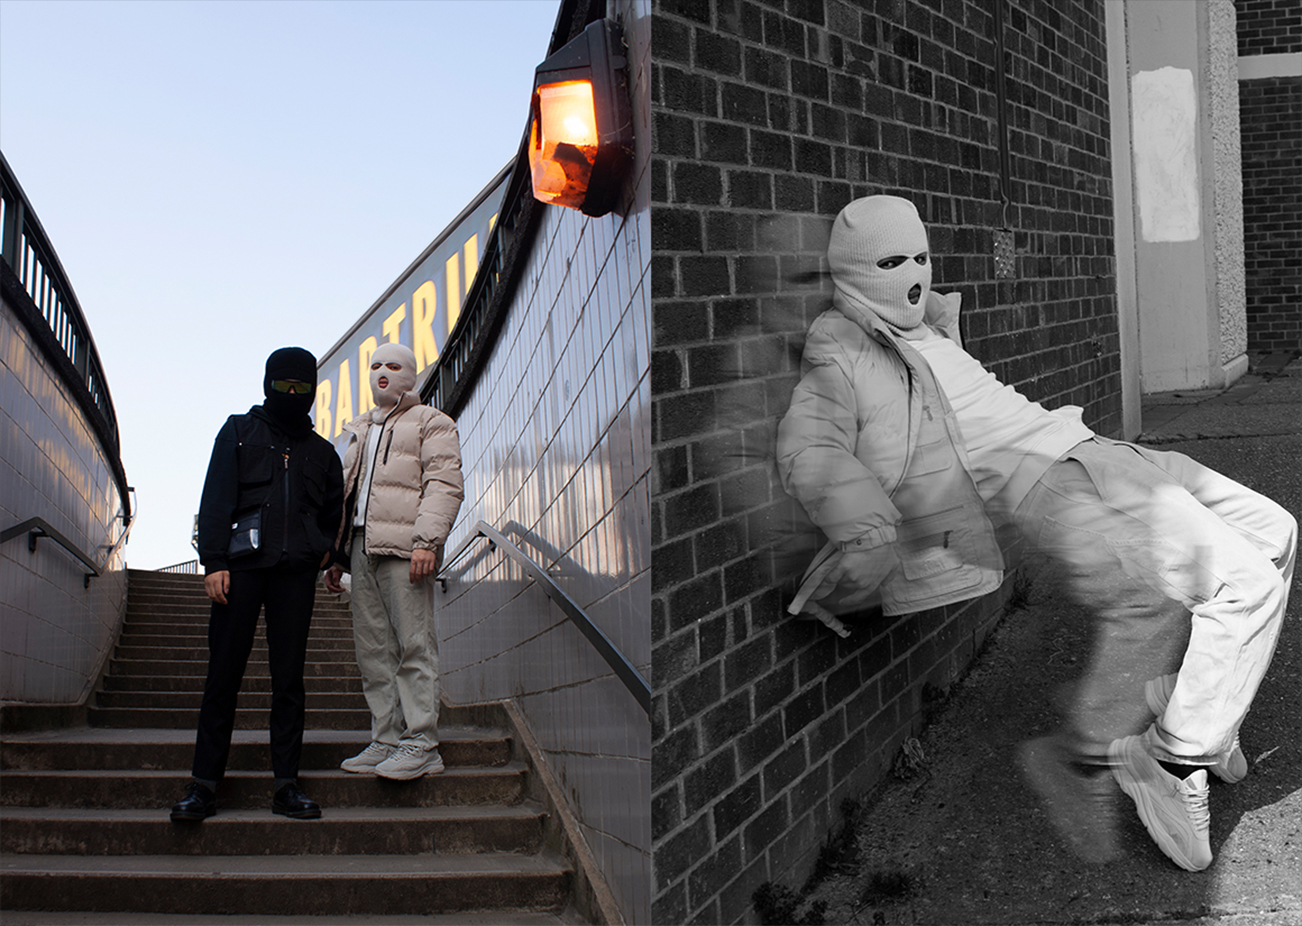 Two images of masked models with an urban aesthetic by Charlie Scurlock